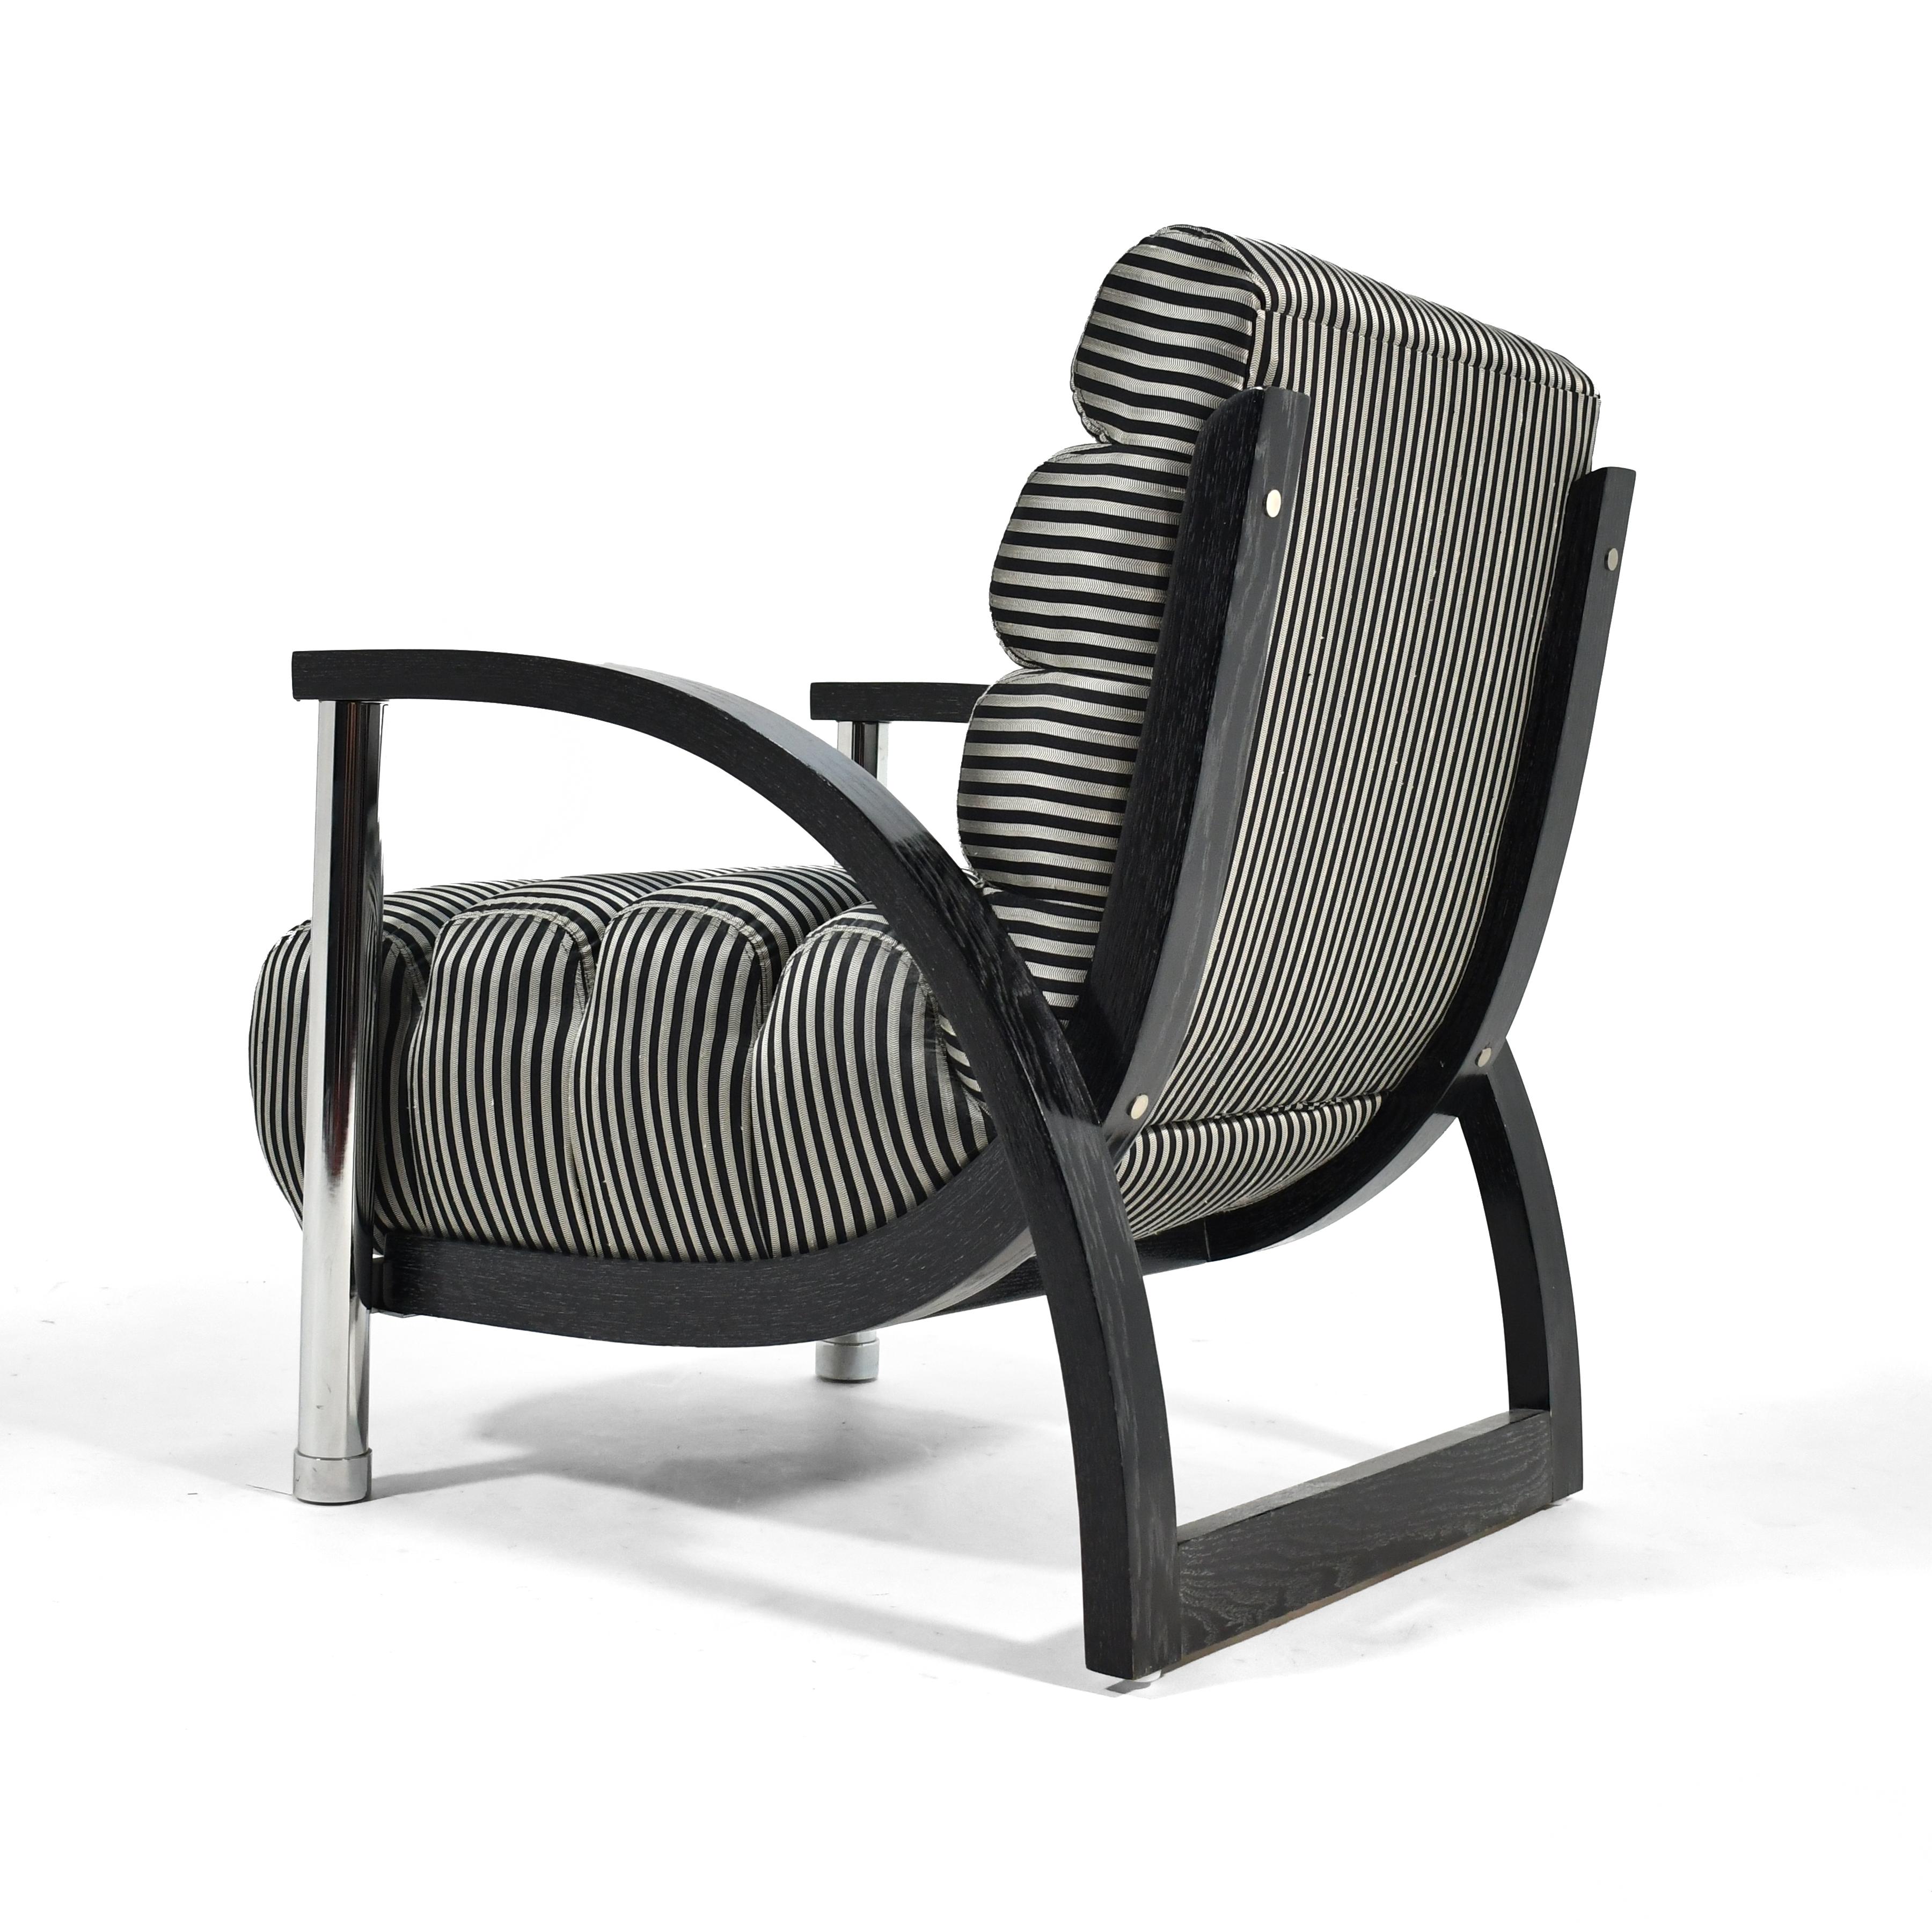 American Jay Spectre Eclipse Chair by Century For Sale